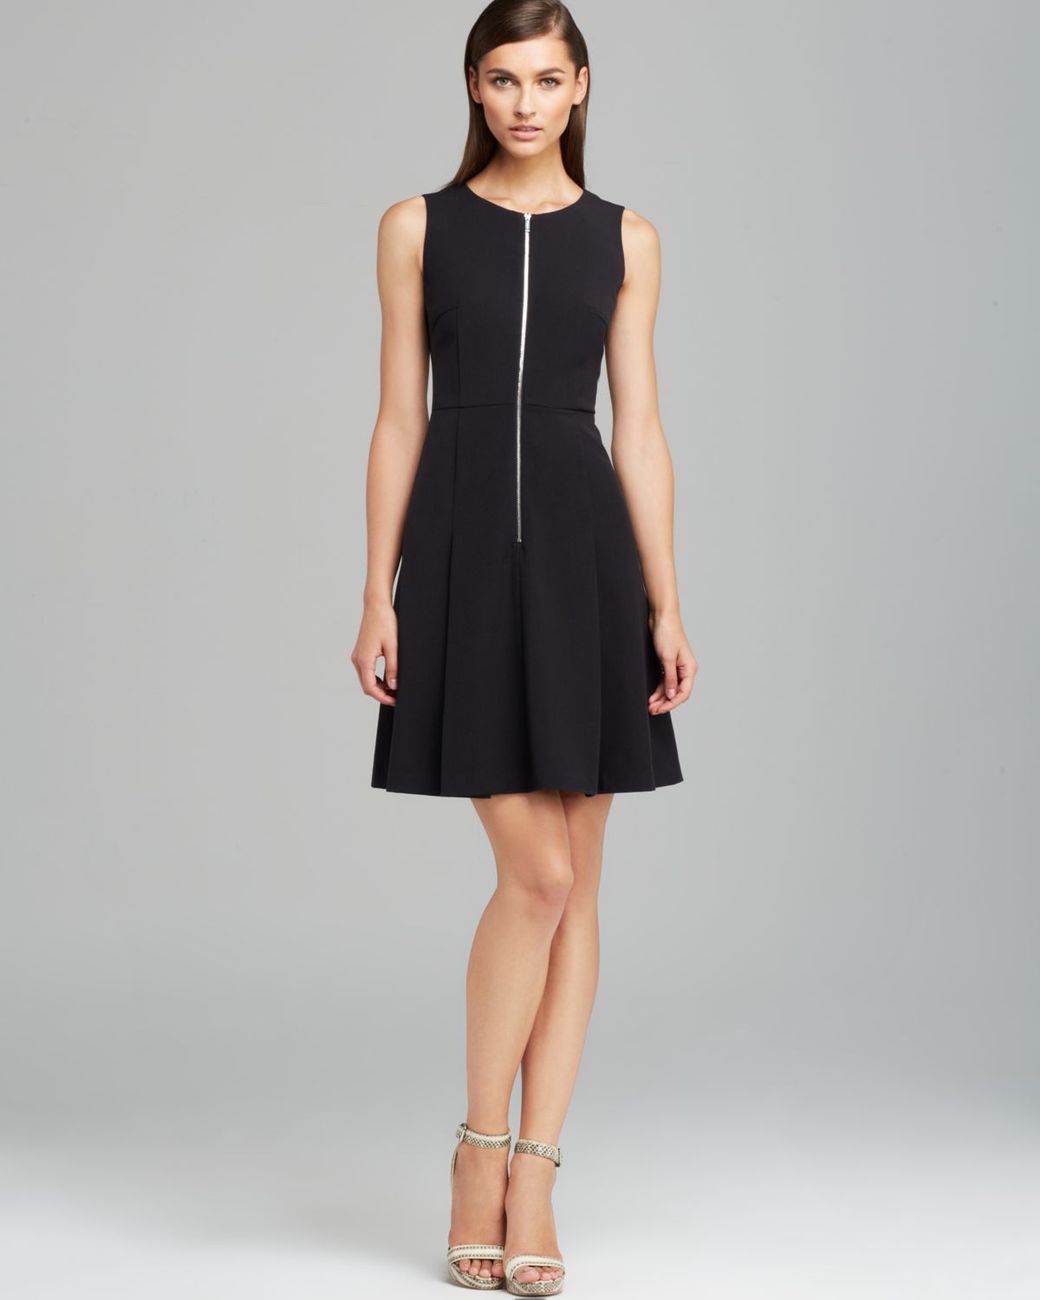 Calvin Klein Zip Front Fit and Flare Dress in Black | Lyst